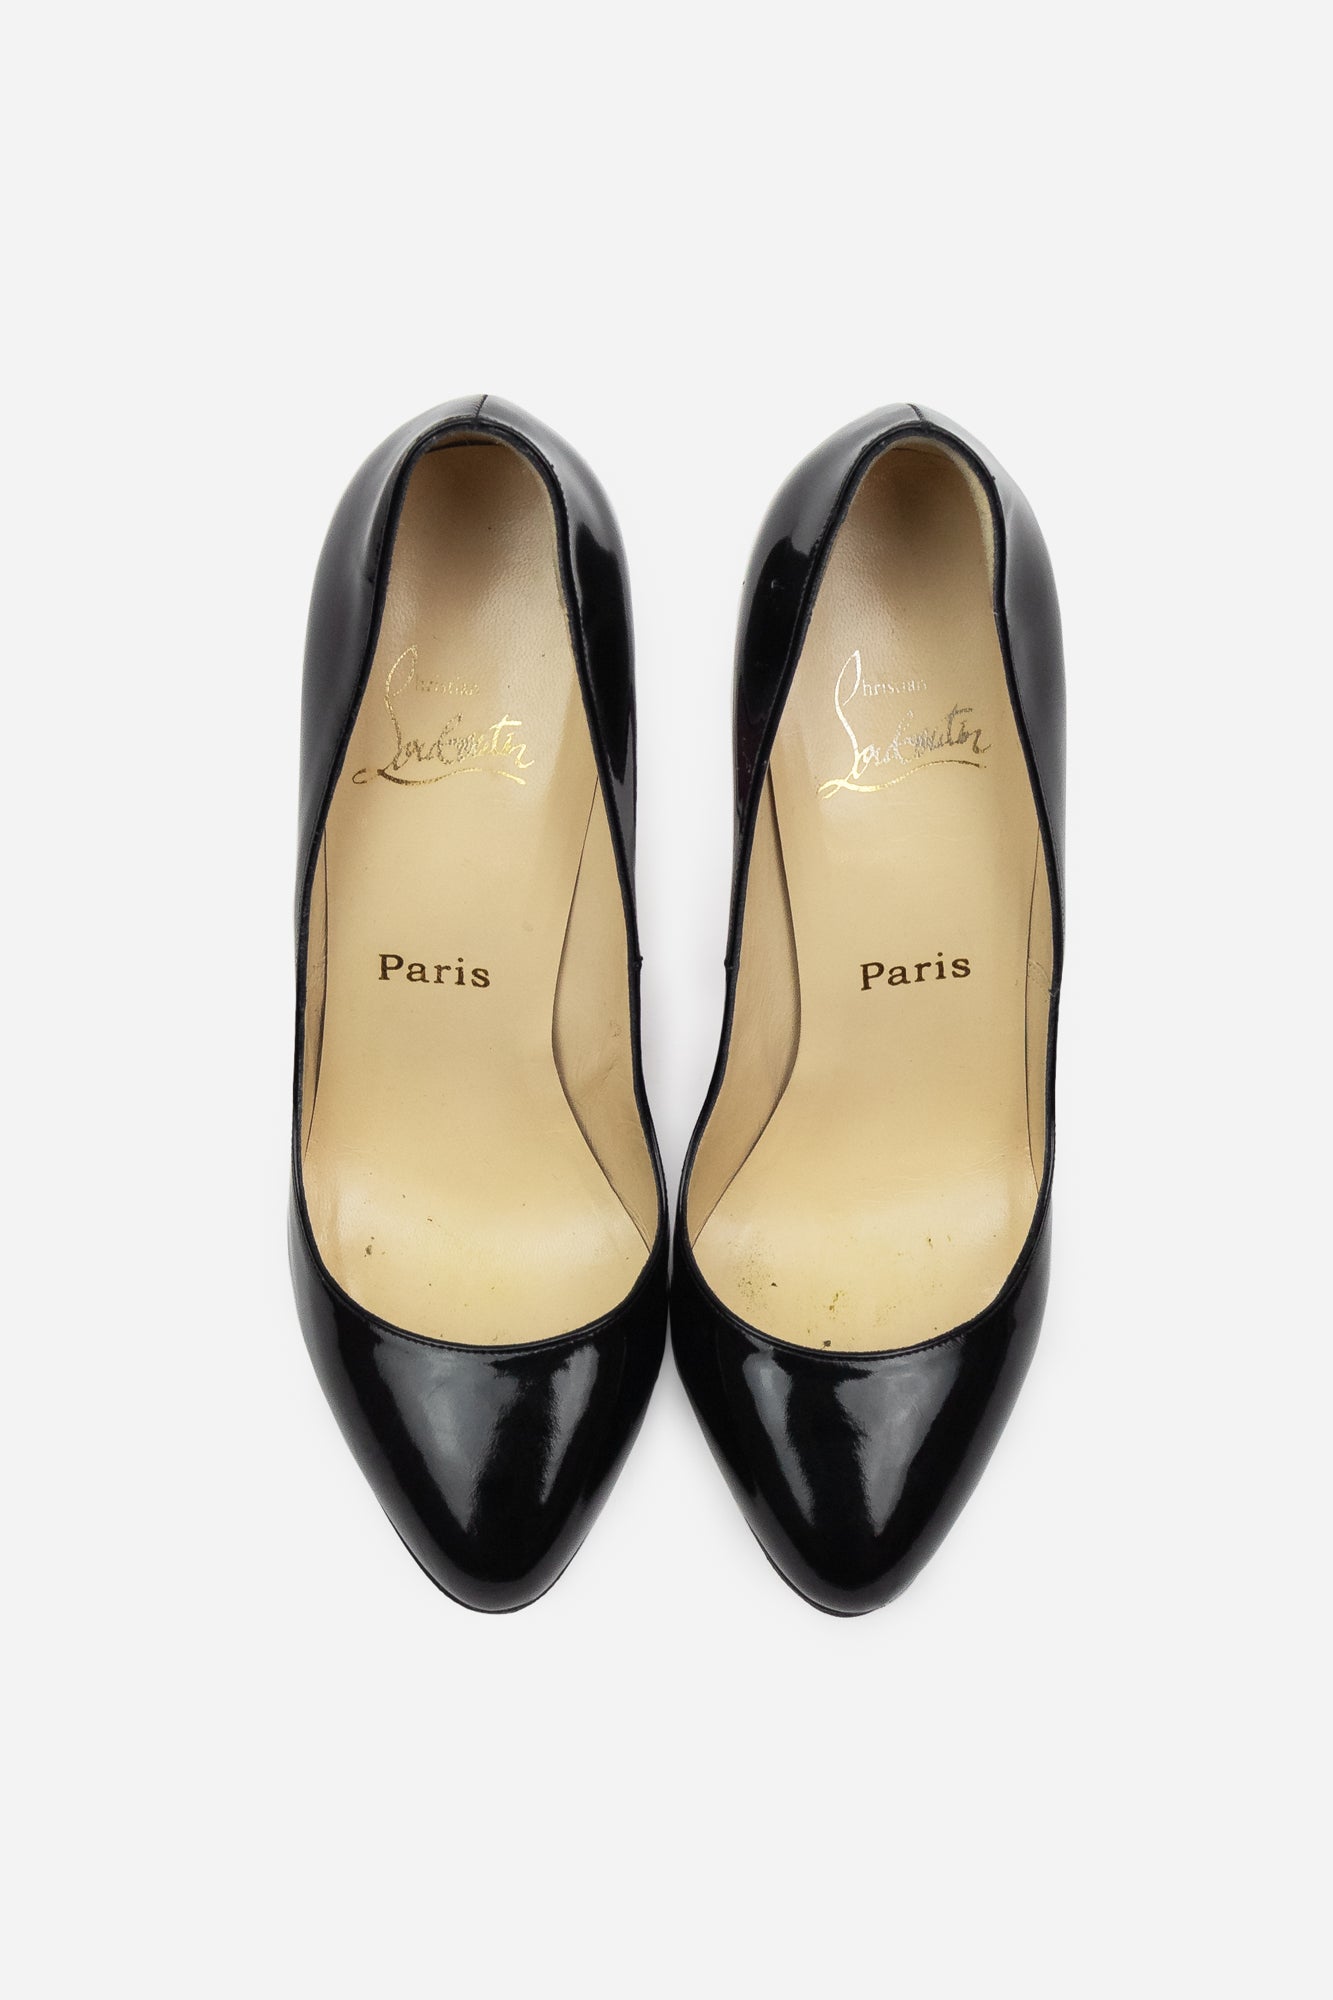 Black Patent Pumps with Silver Heel